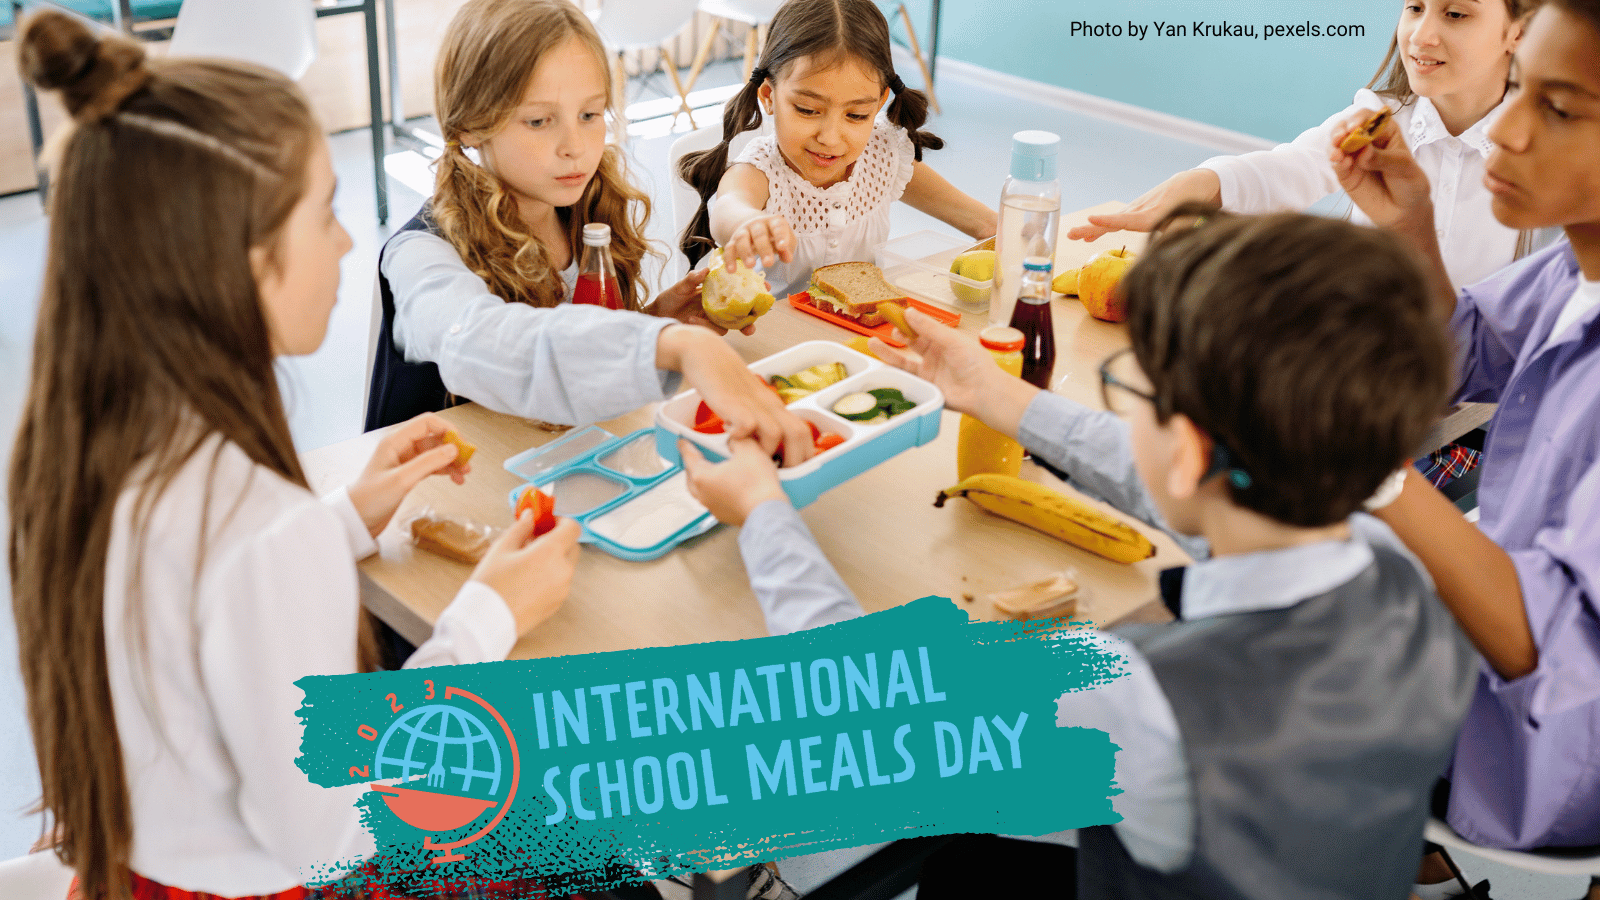 International school meals day: A ‘Whole School Food Approach’ is needed!